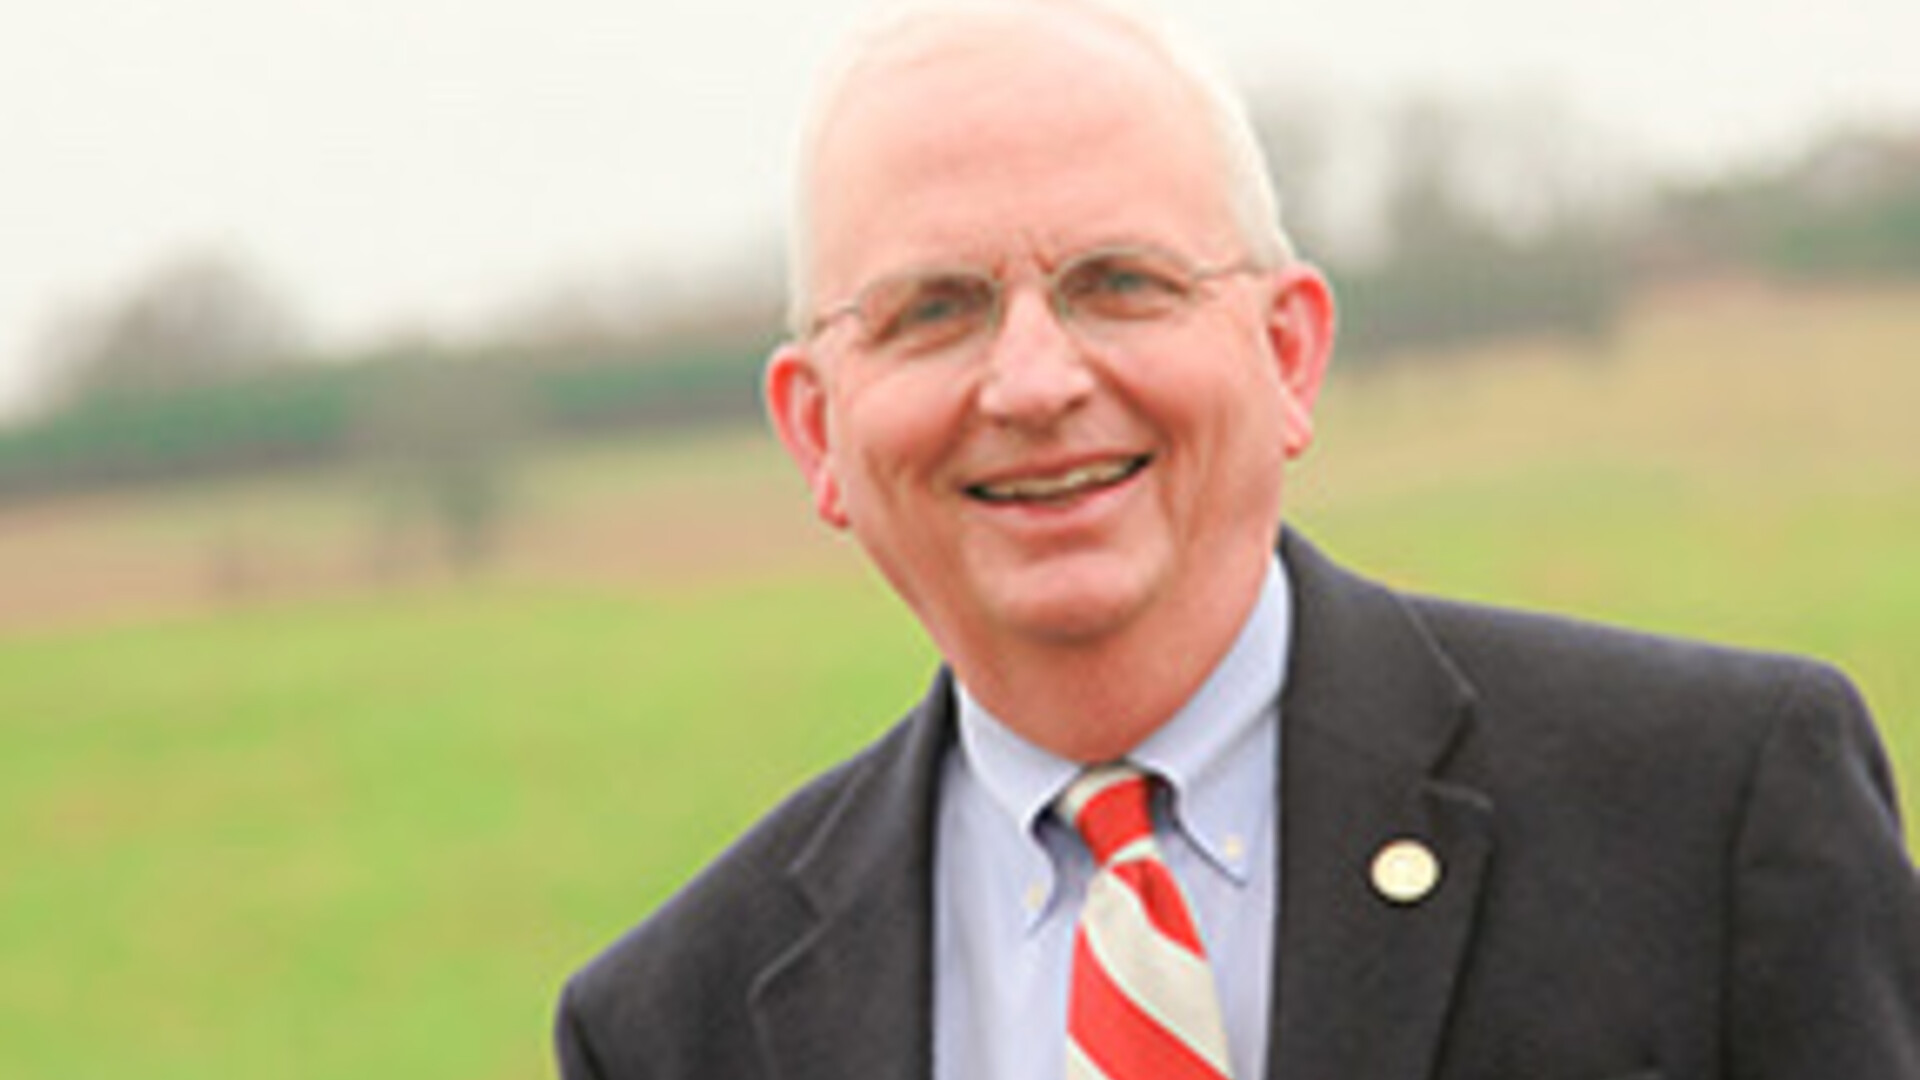 Change of Leadership at Helm of GA Department of Agriculture